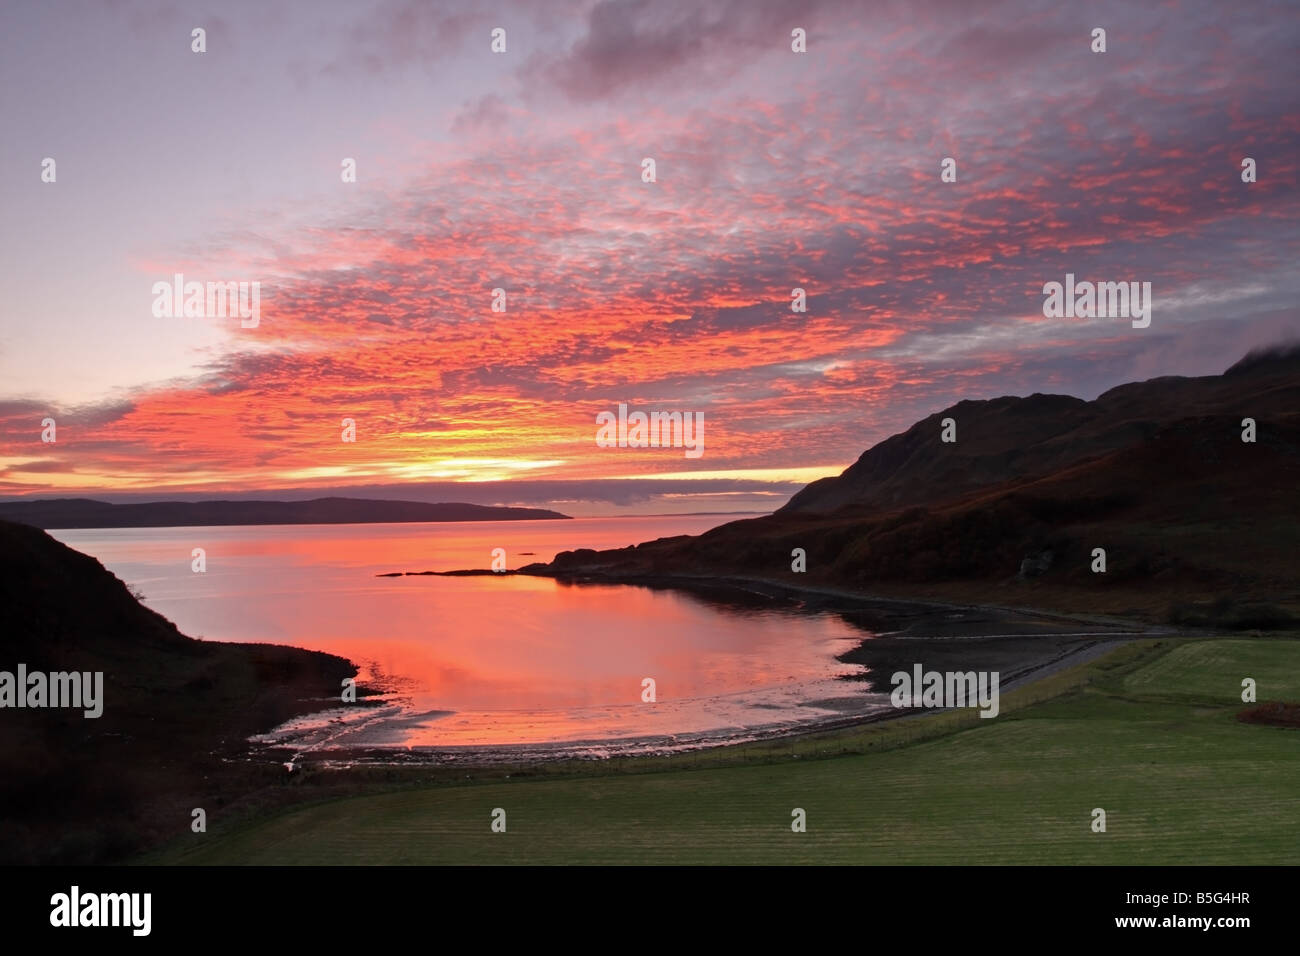 Sunset Over Southern Coastline of the Ardnamurchan Peninsular from the Bay of Camas nan Geall Scotland Stock Photo